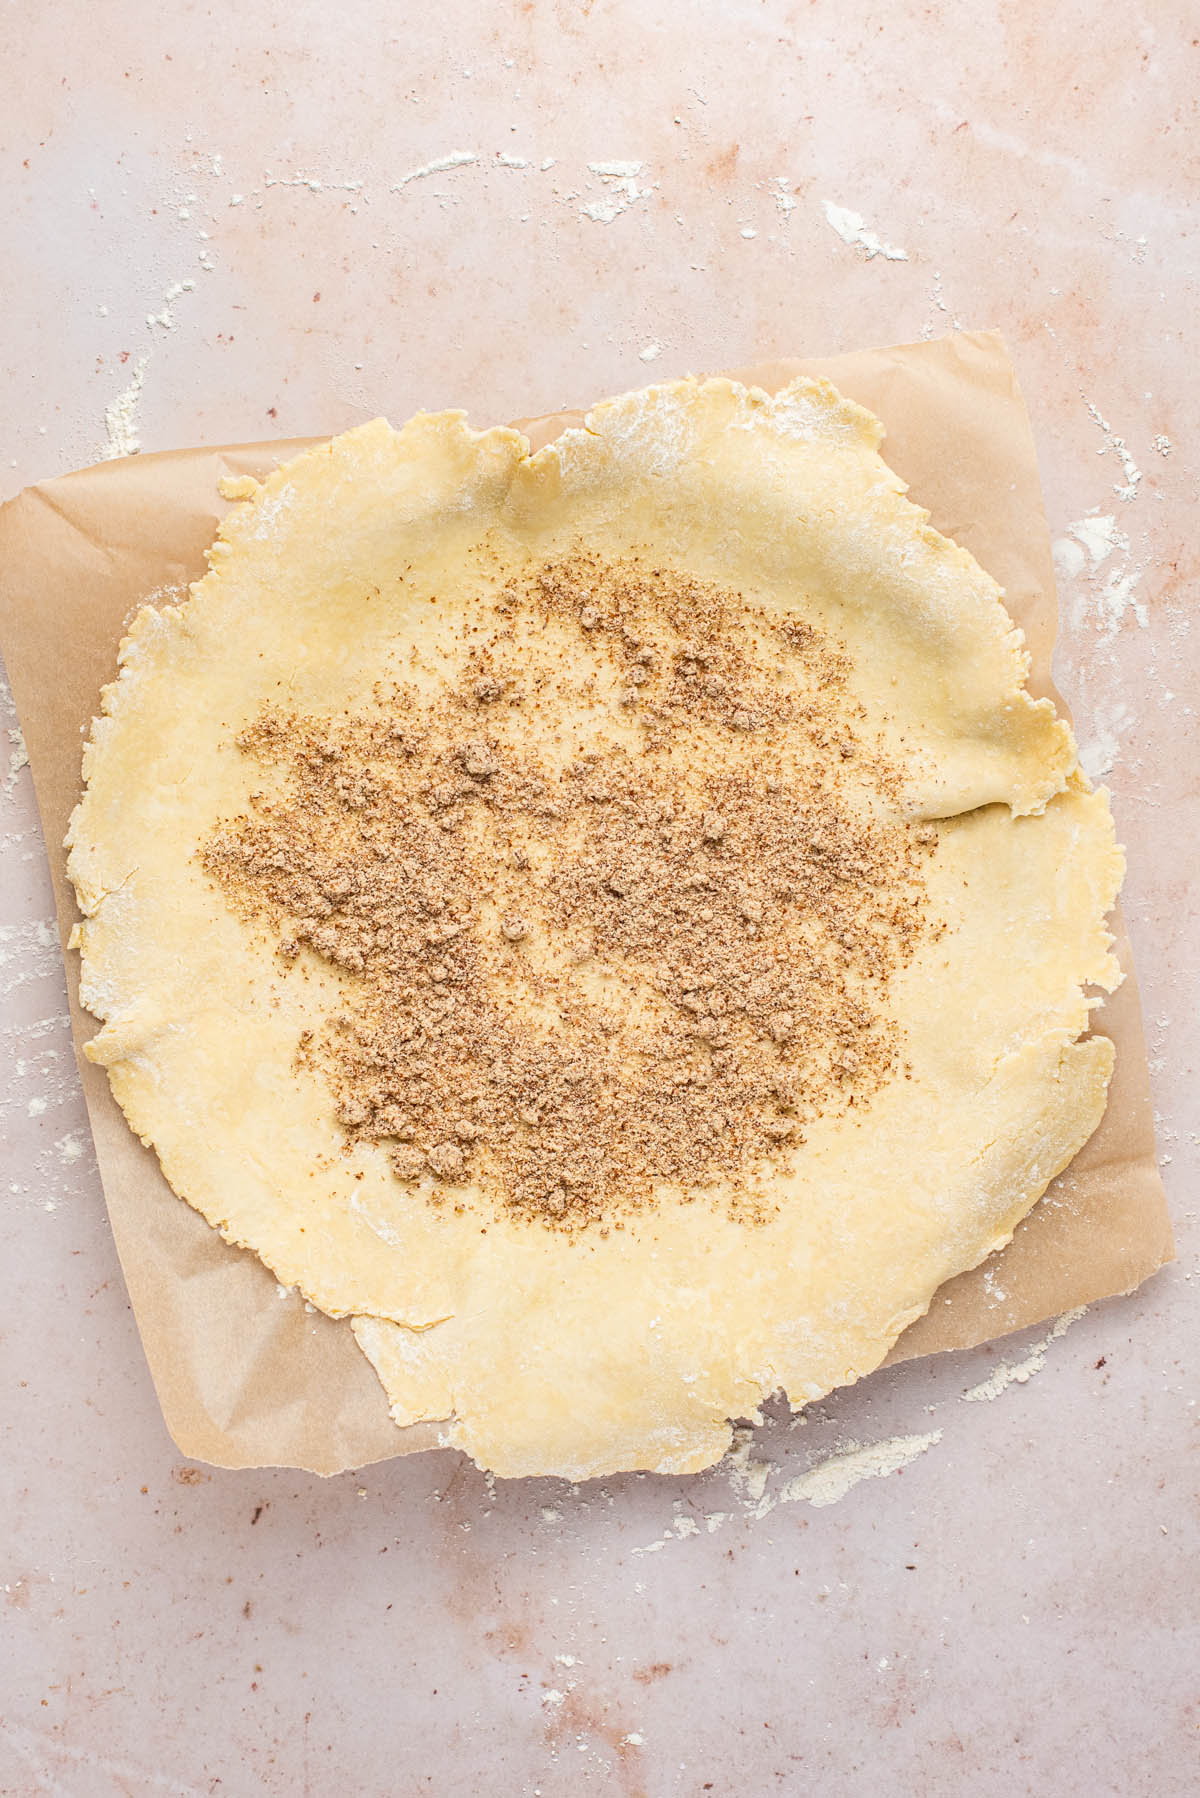 Almond meal added to the base of the pastry.